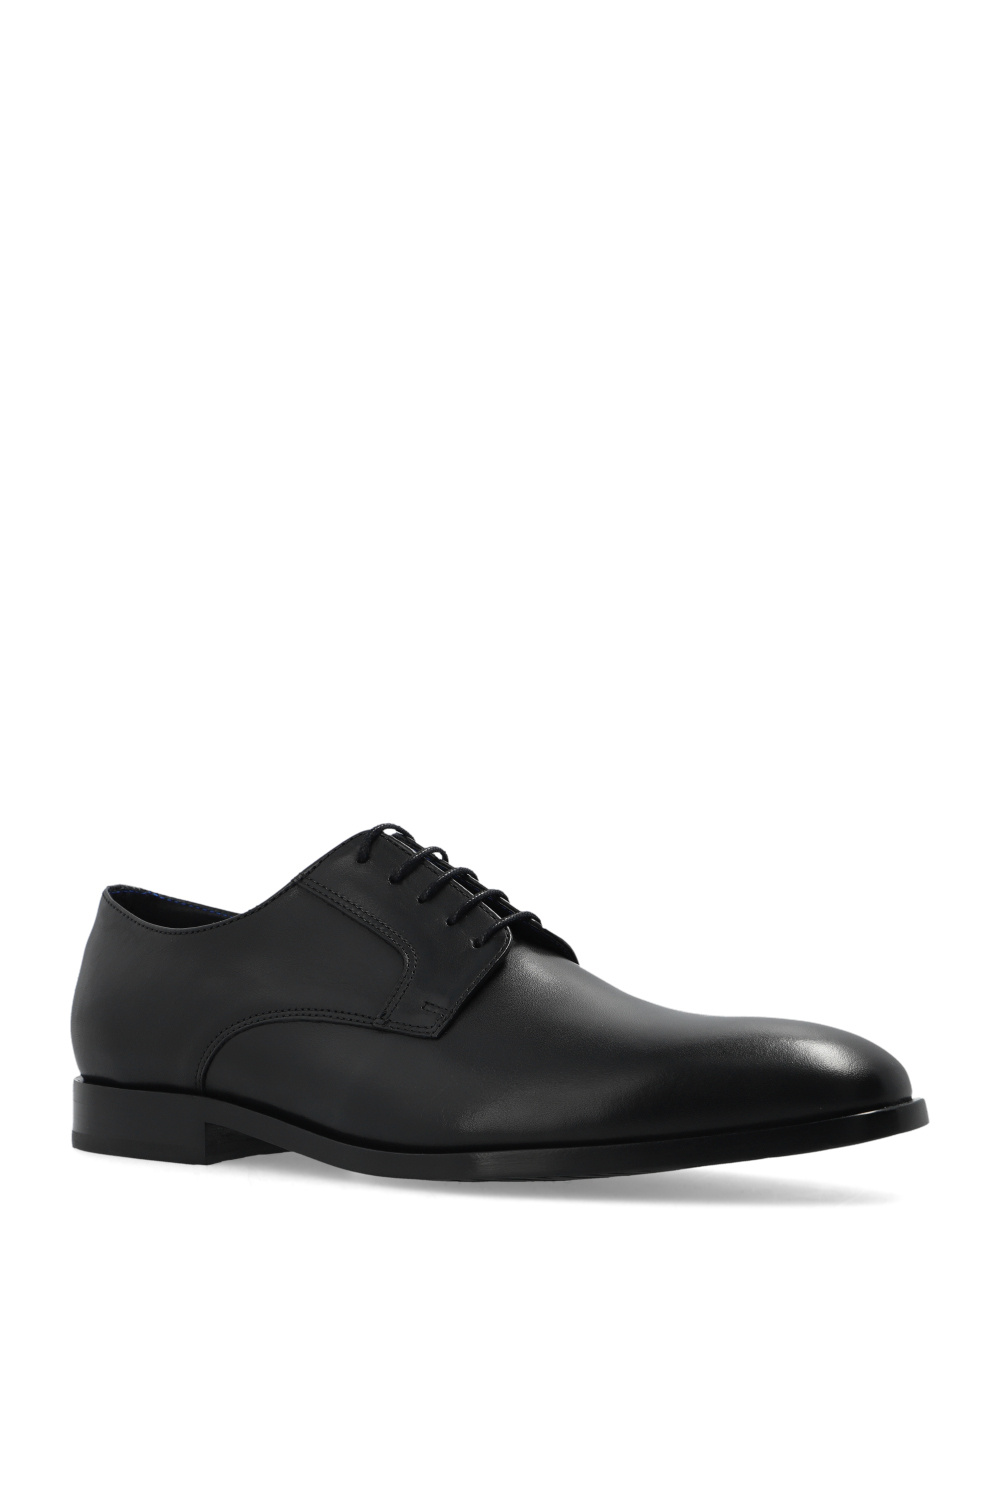 PS Paul Smith ‘Rufus’ derby talla shoes